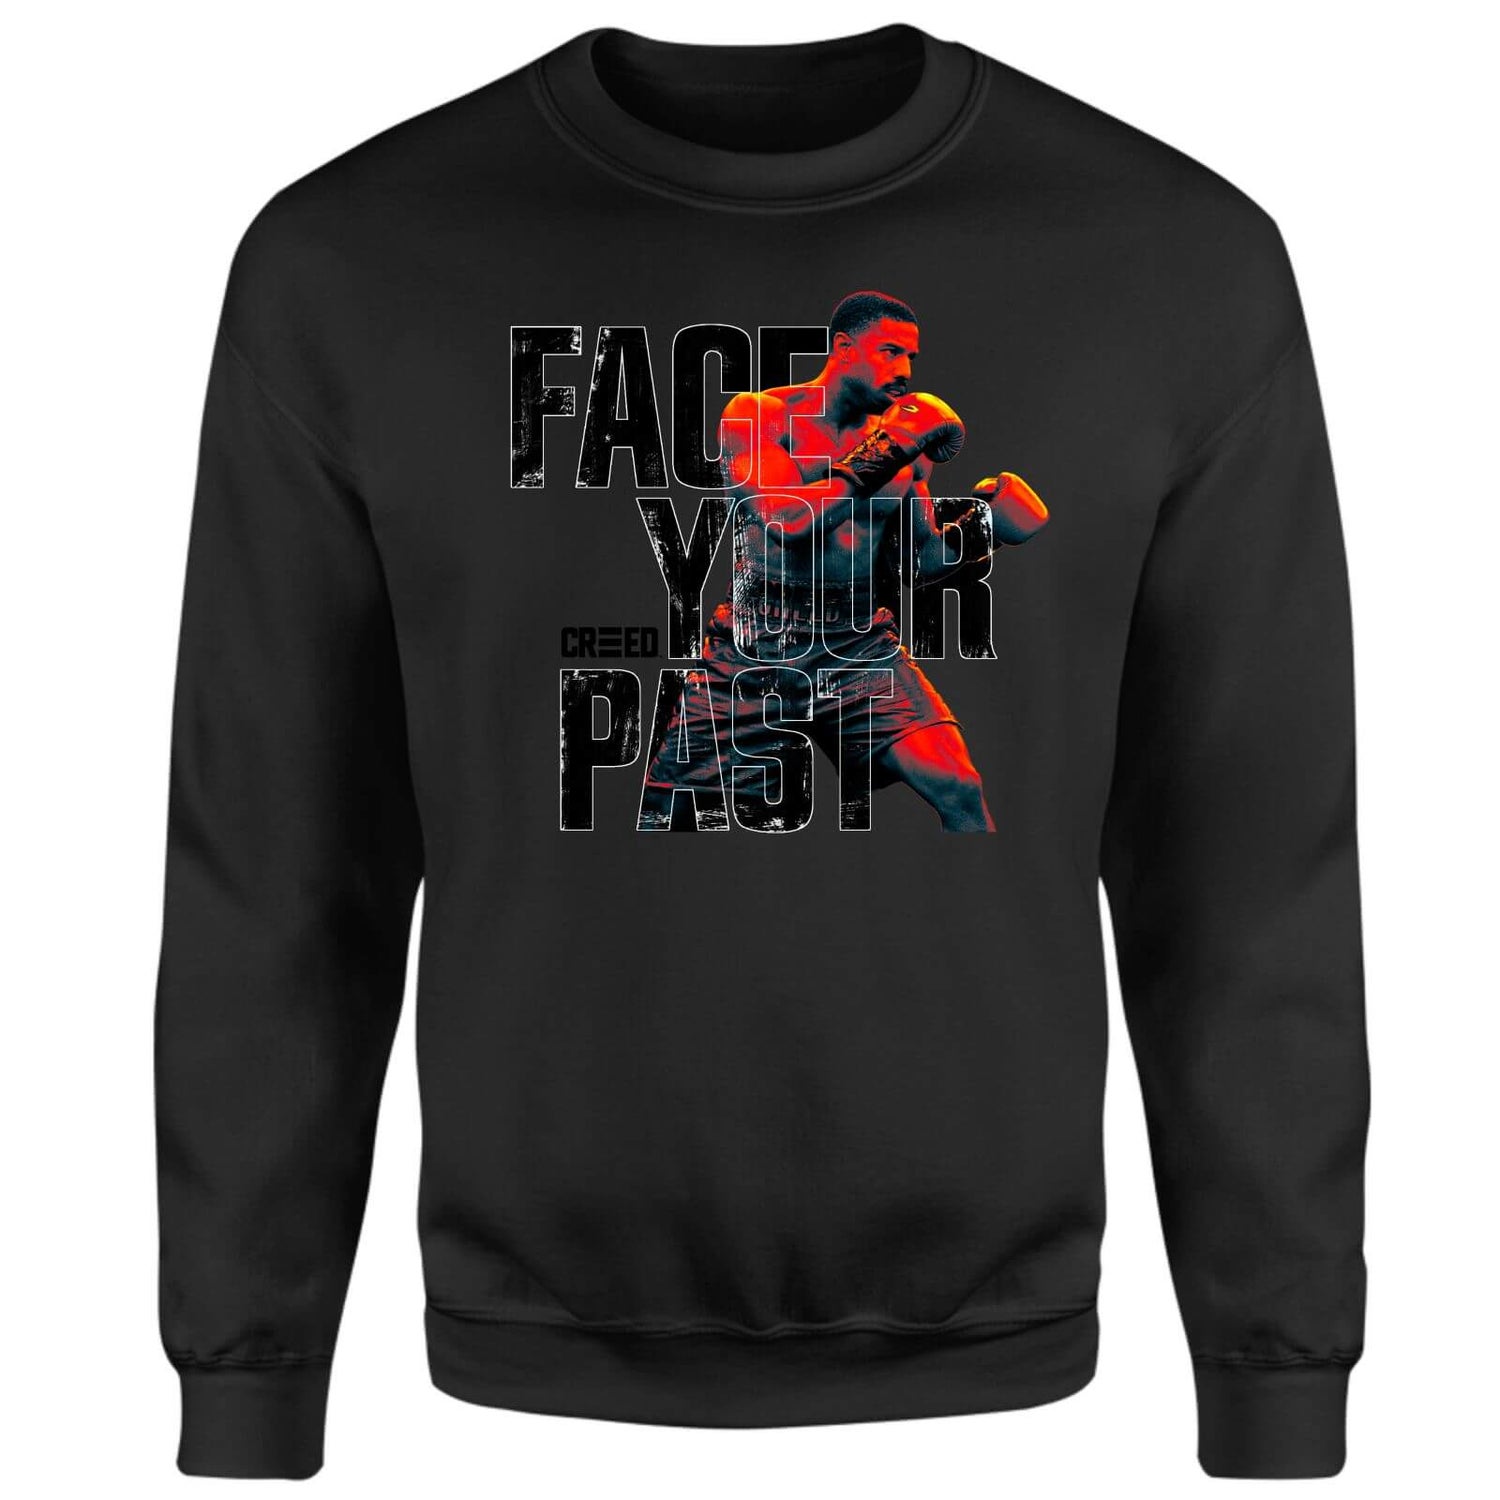 Creed Face Your Past Sweatshirt - Black